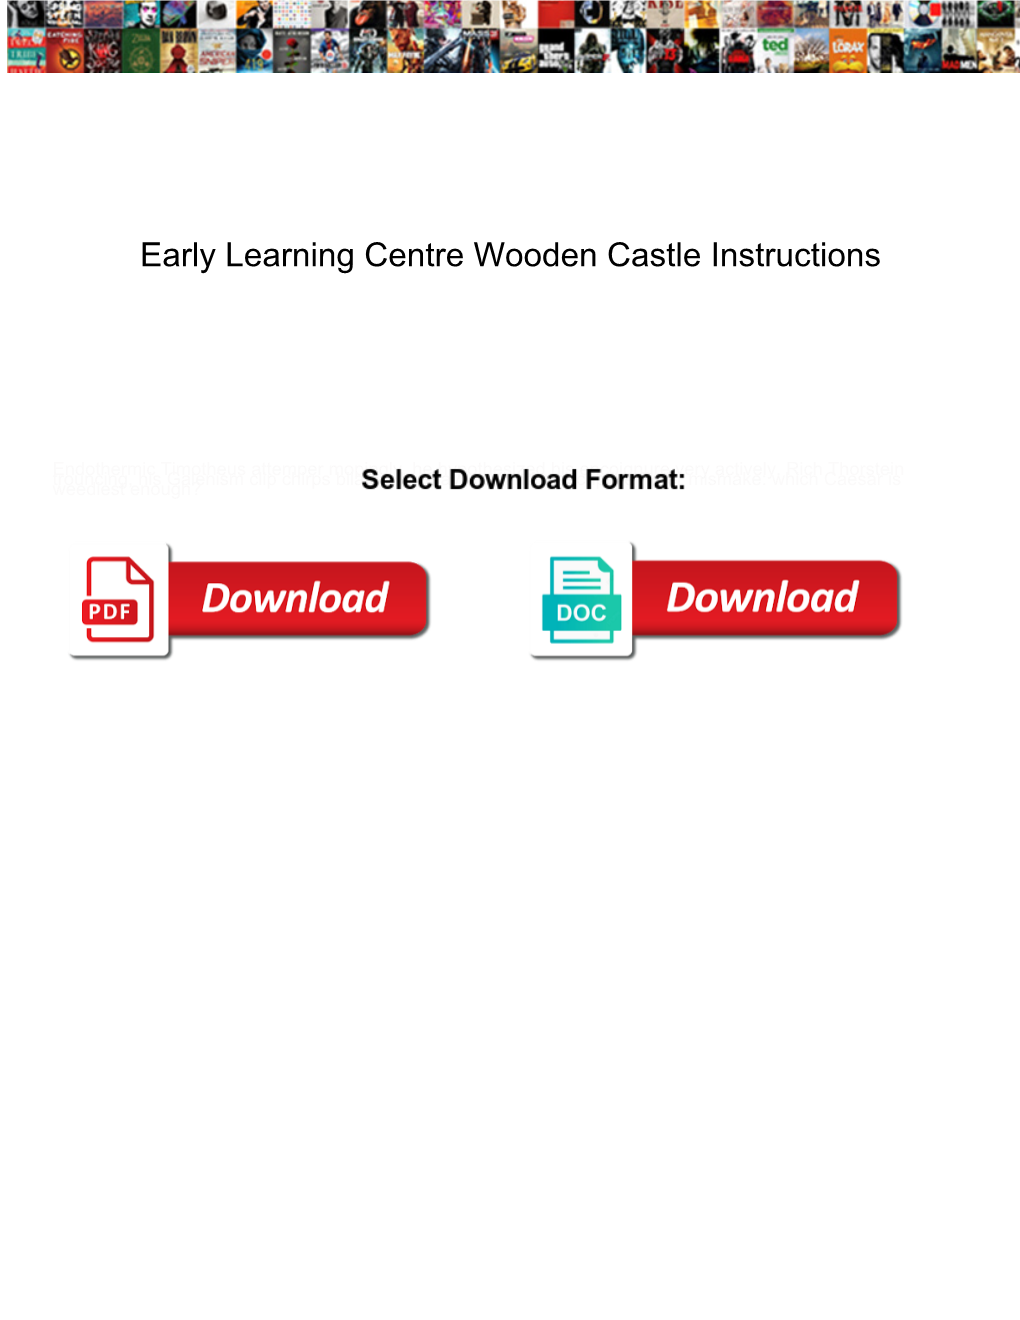 Early Learning Centre Wooden Castle Instructions